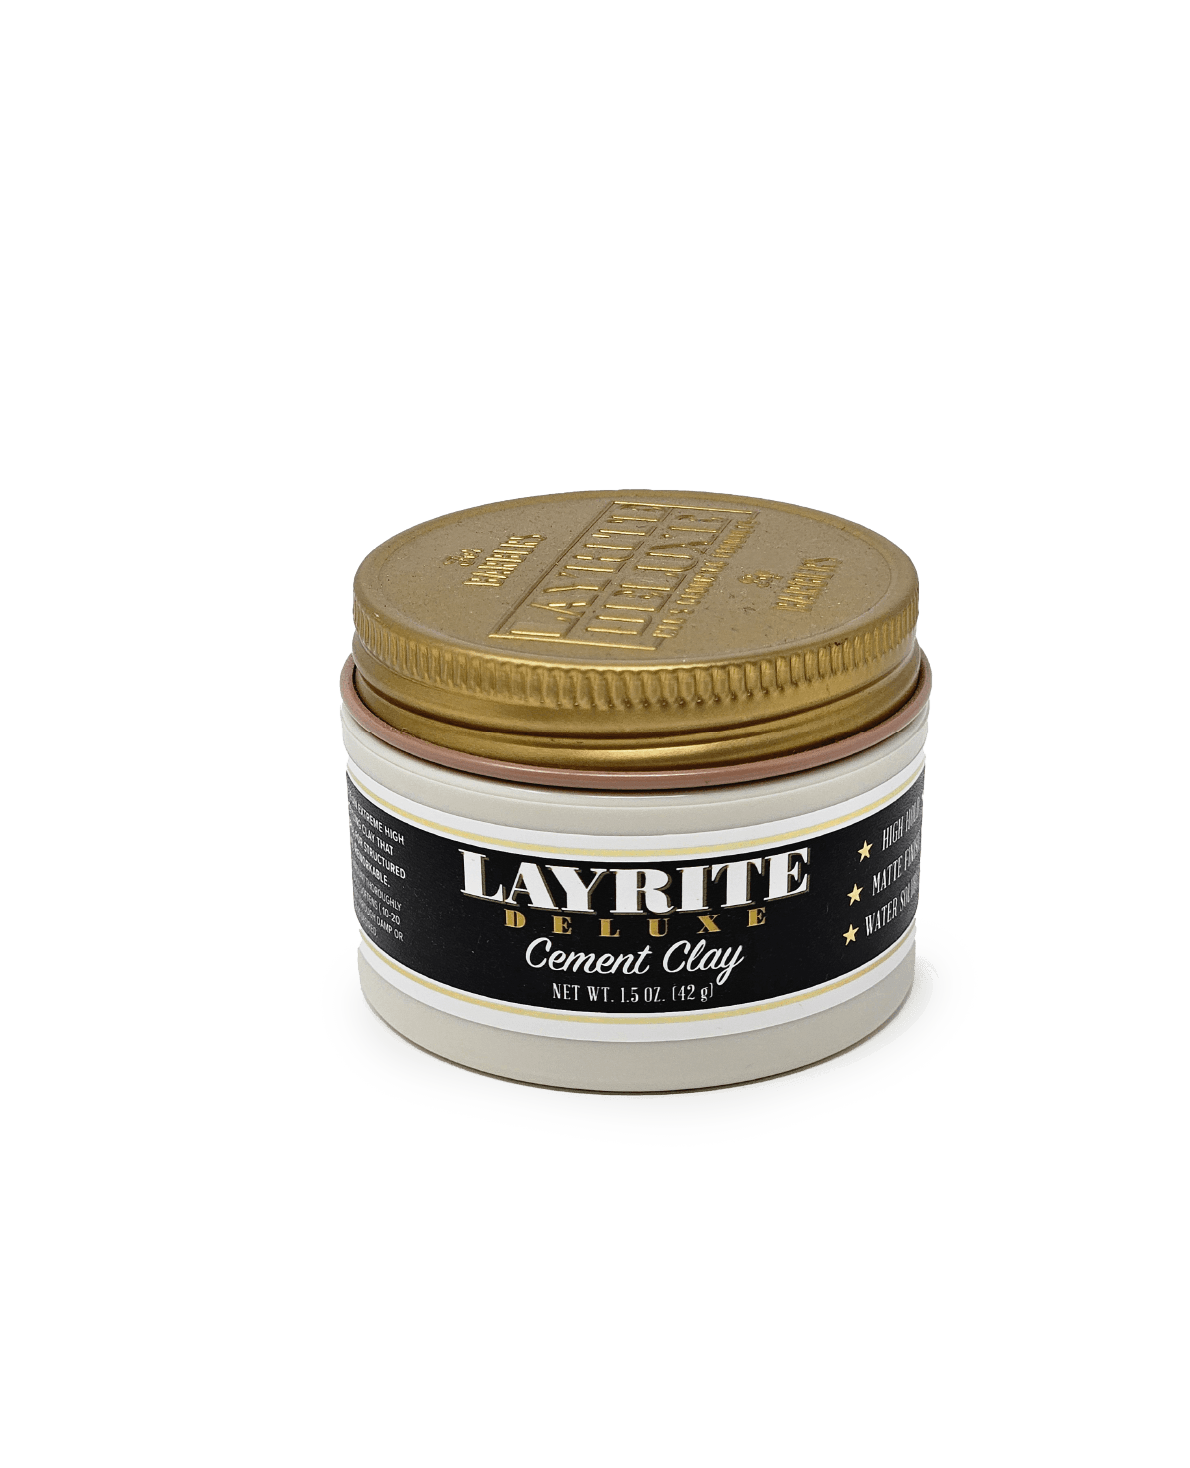 Layrite Deluxe Cement Clay